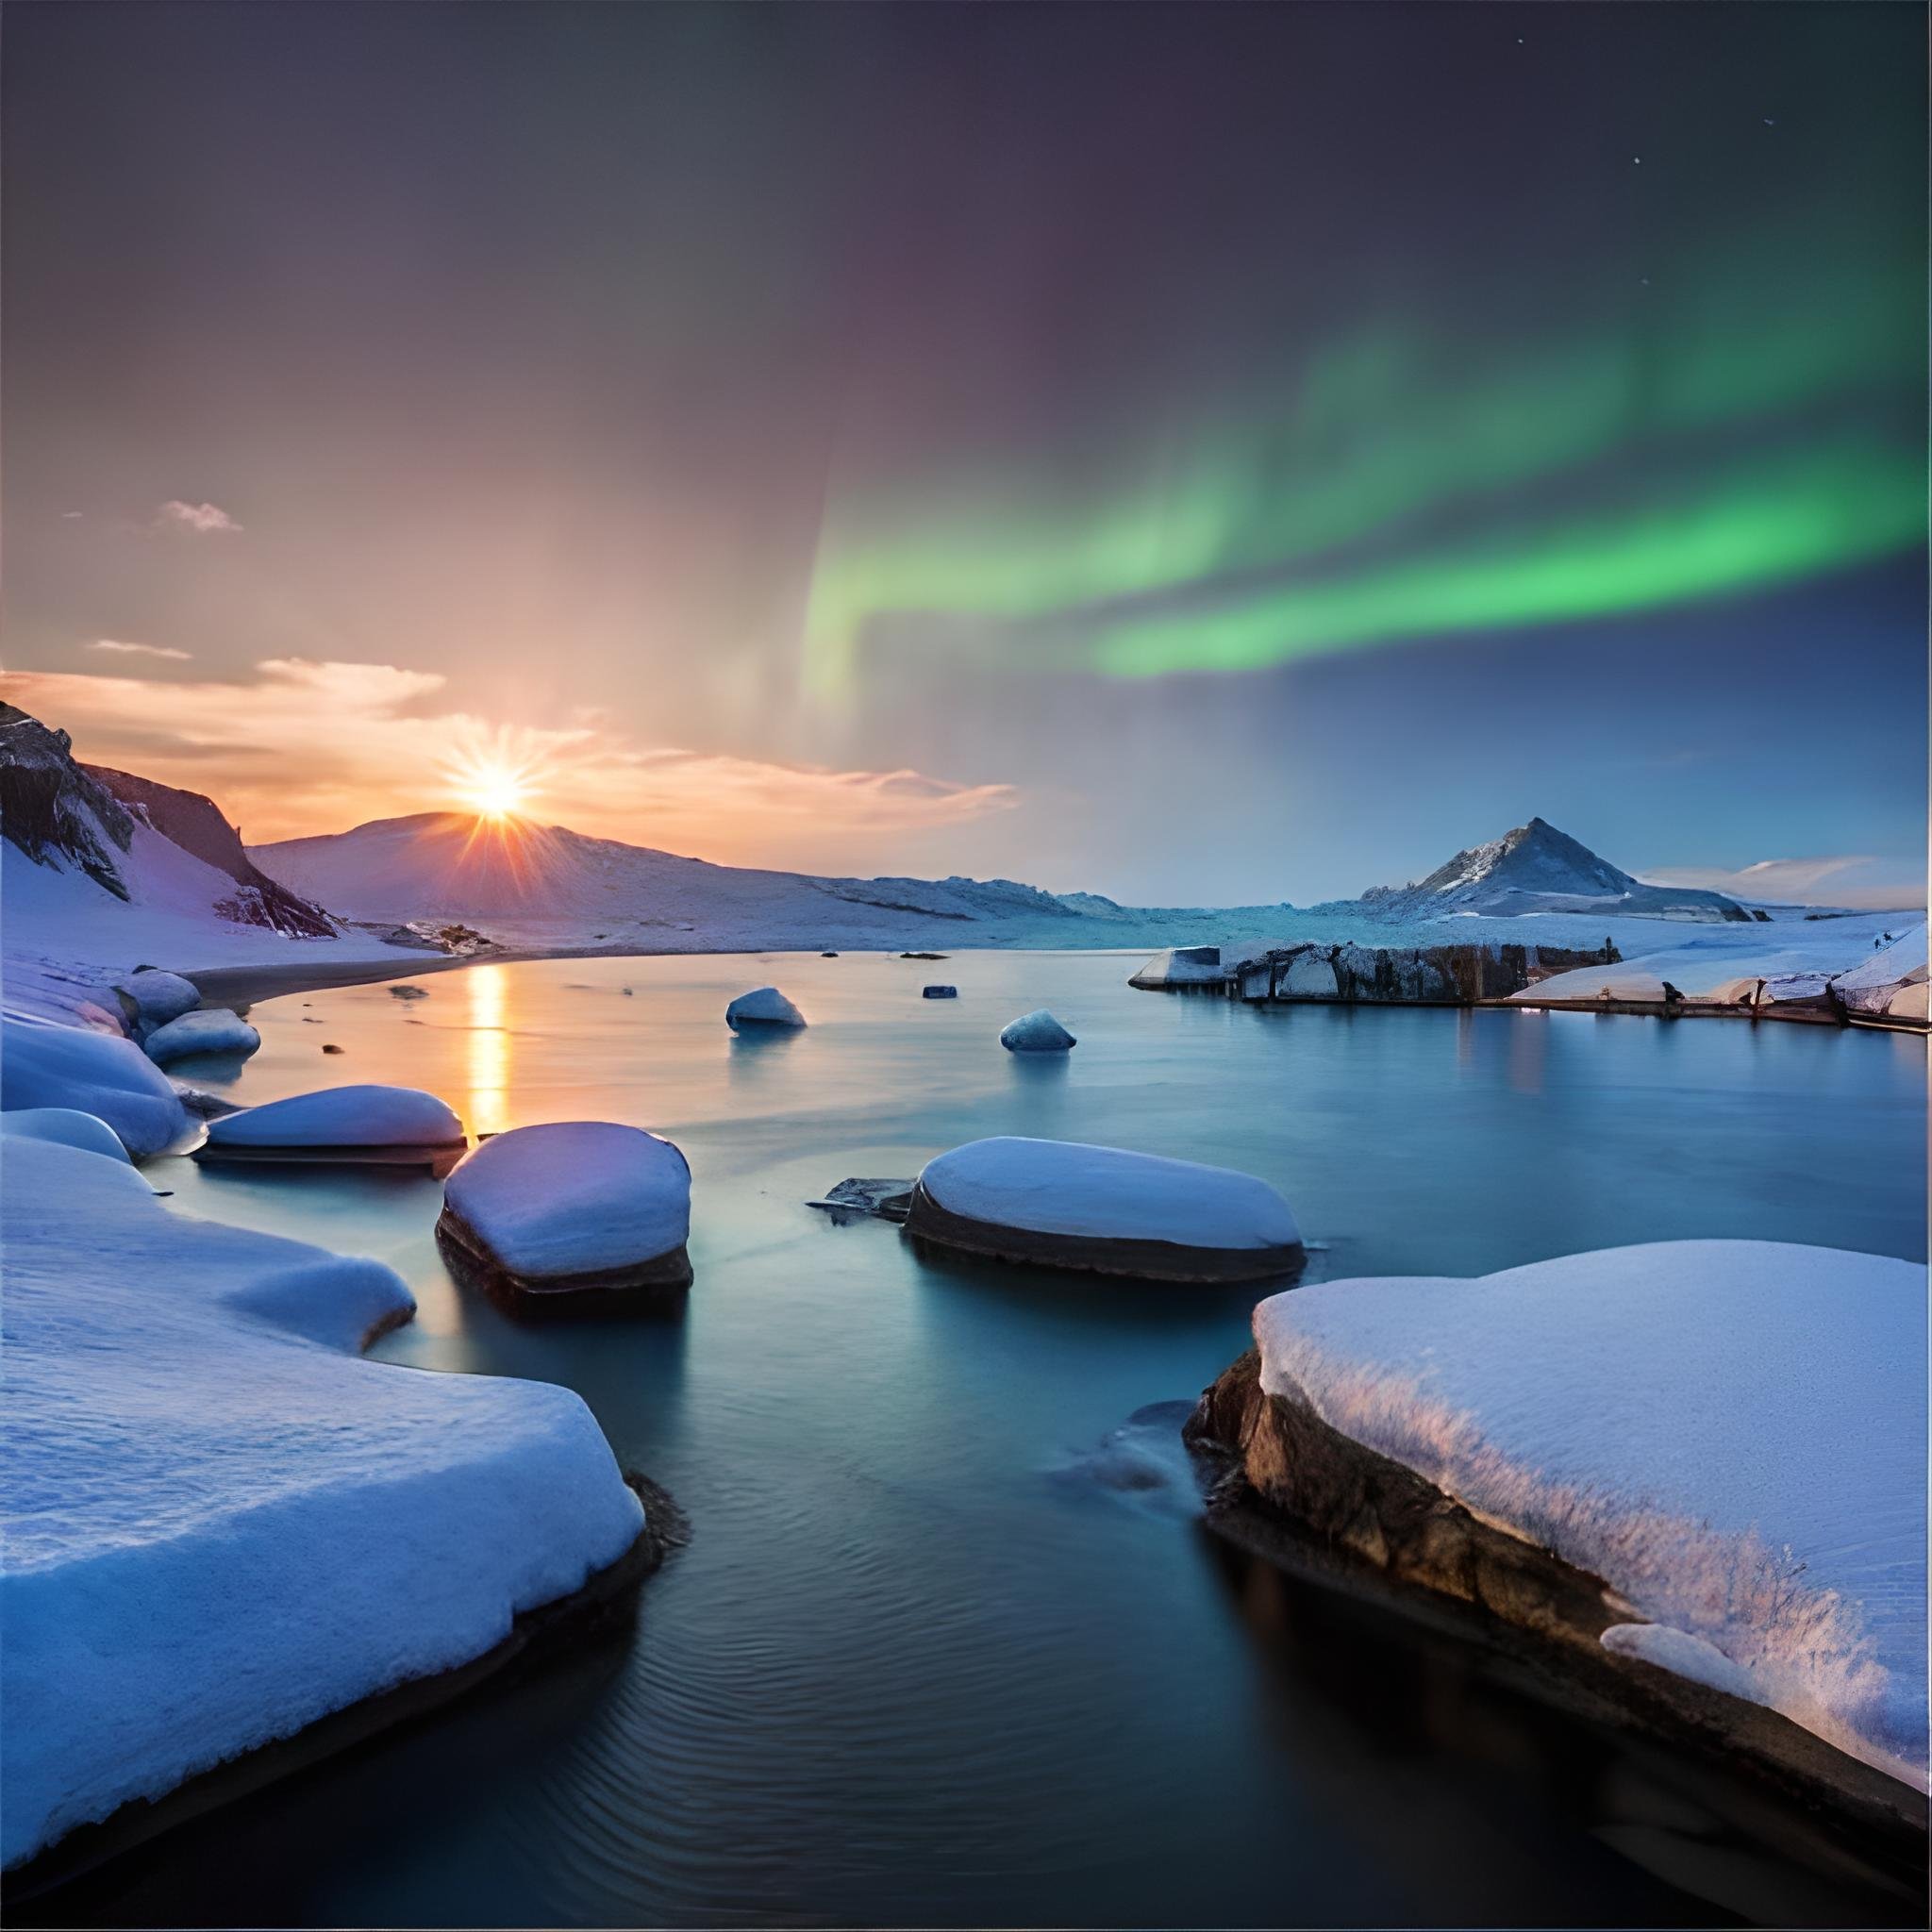 Iceland's otherworldly landscapes, volcanoes, glaciers, and geothermal springs, make it a dream destination for adventure travelers. Explore ice caves, hike along rugged trails, witness the mesmerizing Northern Lights or dive between tectonic plates. Iceland's untouched beauty will ignite your sense of wonder.